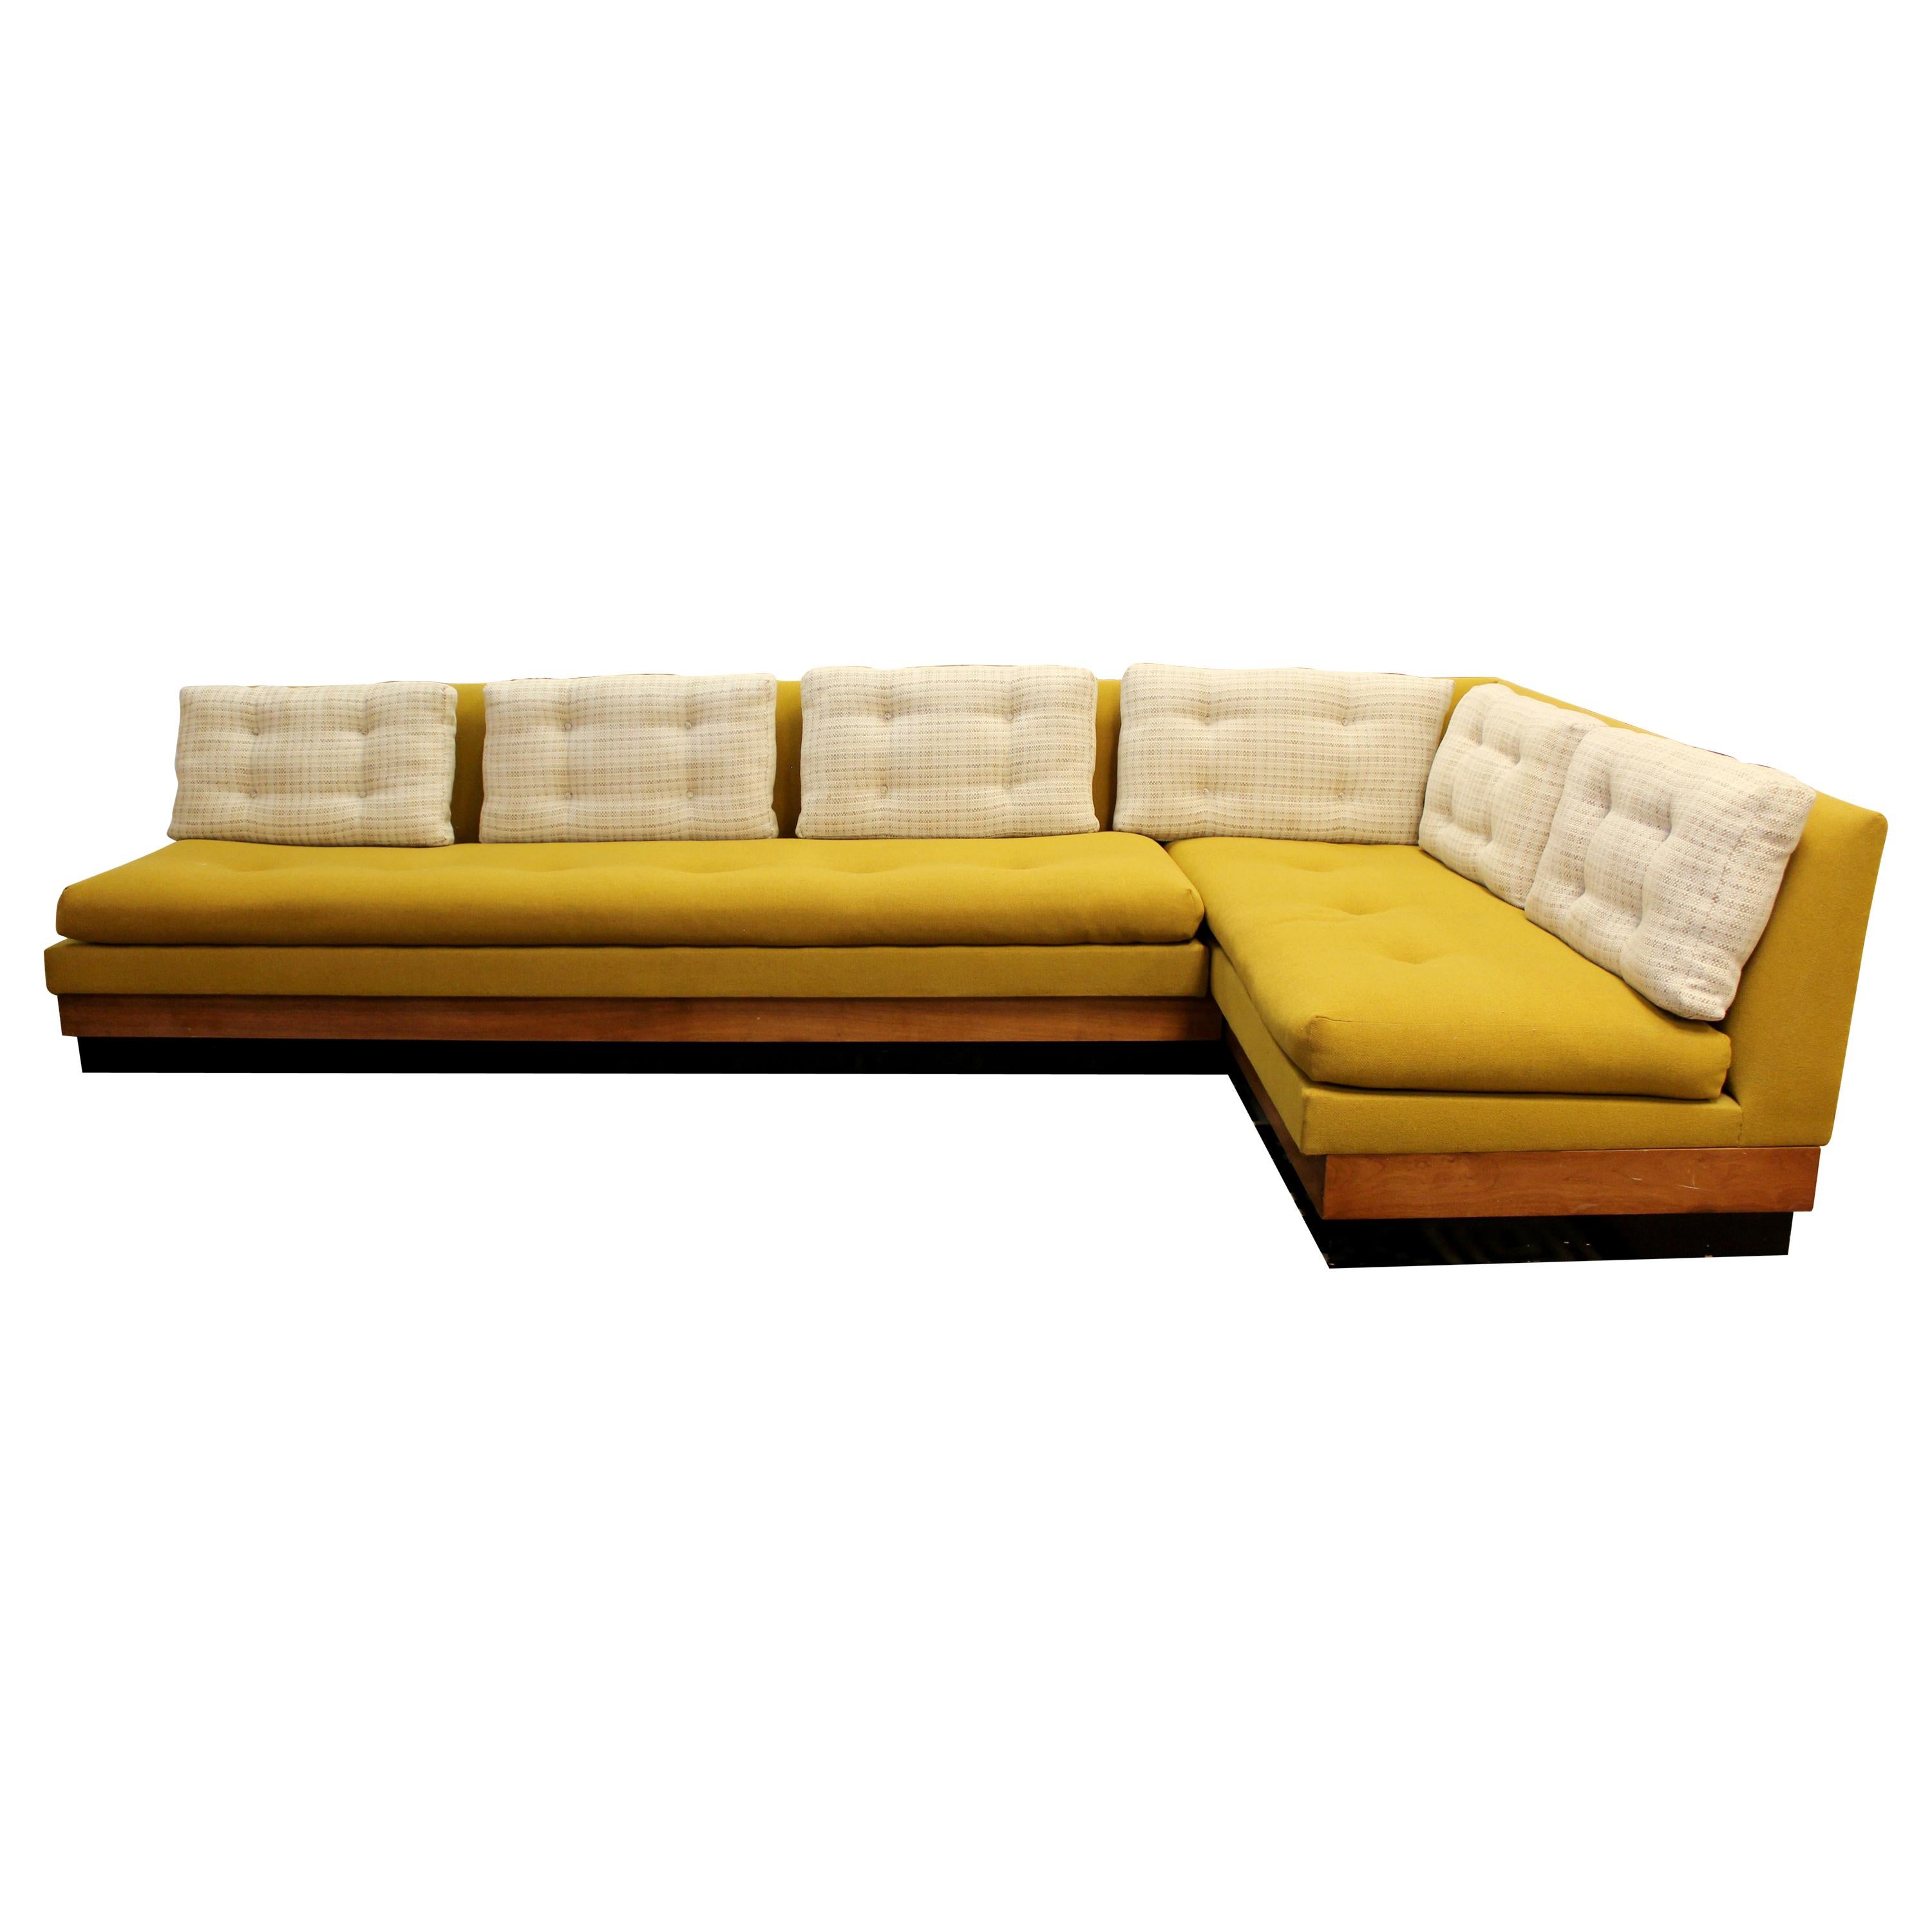 Mid-Century Modern Adrian Pearsall Craft Plinth Base 2 Pc Sectional Sofa, 1960s